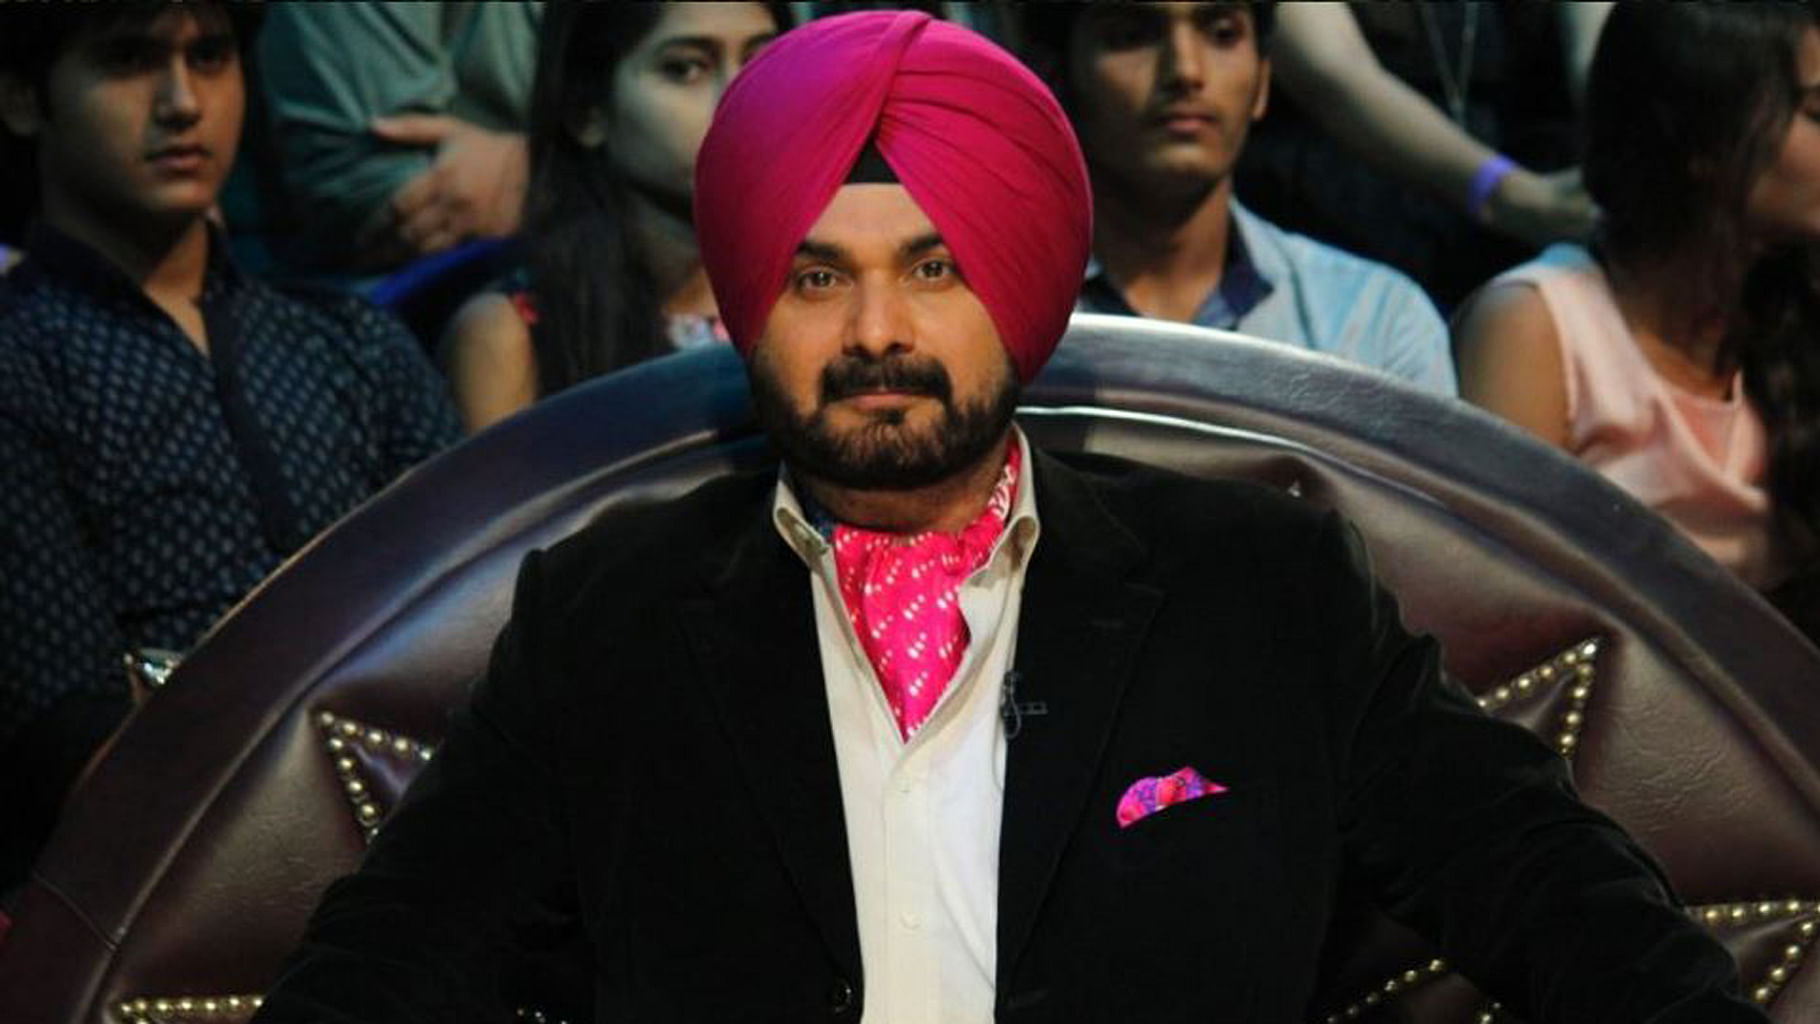 Navjot Singh Sidhu will reportedly join the Aam Aadmi Party. (Photo Courtesy: Twitter/<a href="https://twitter.com/sherryontopp">@sherryontop</a>)